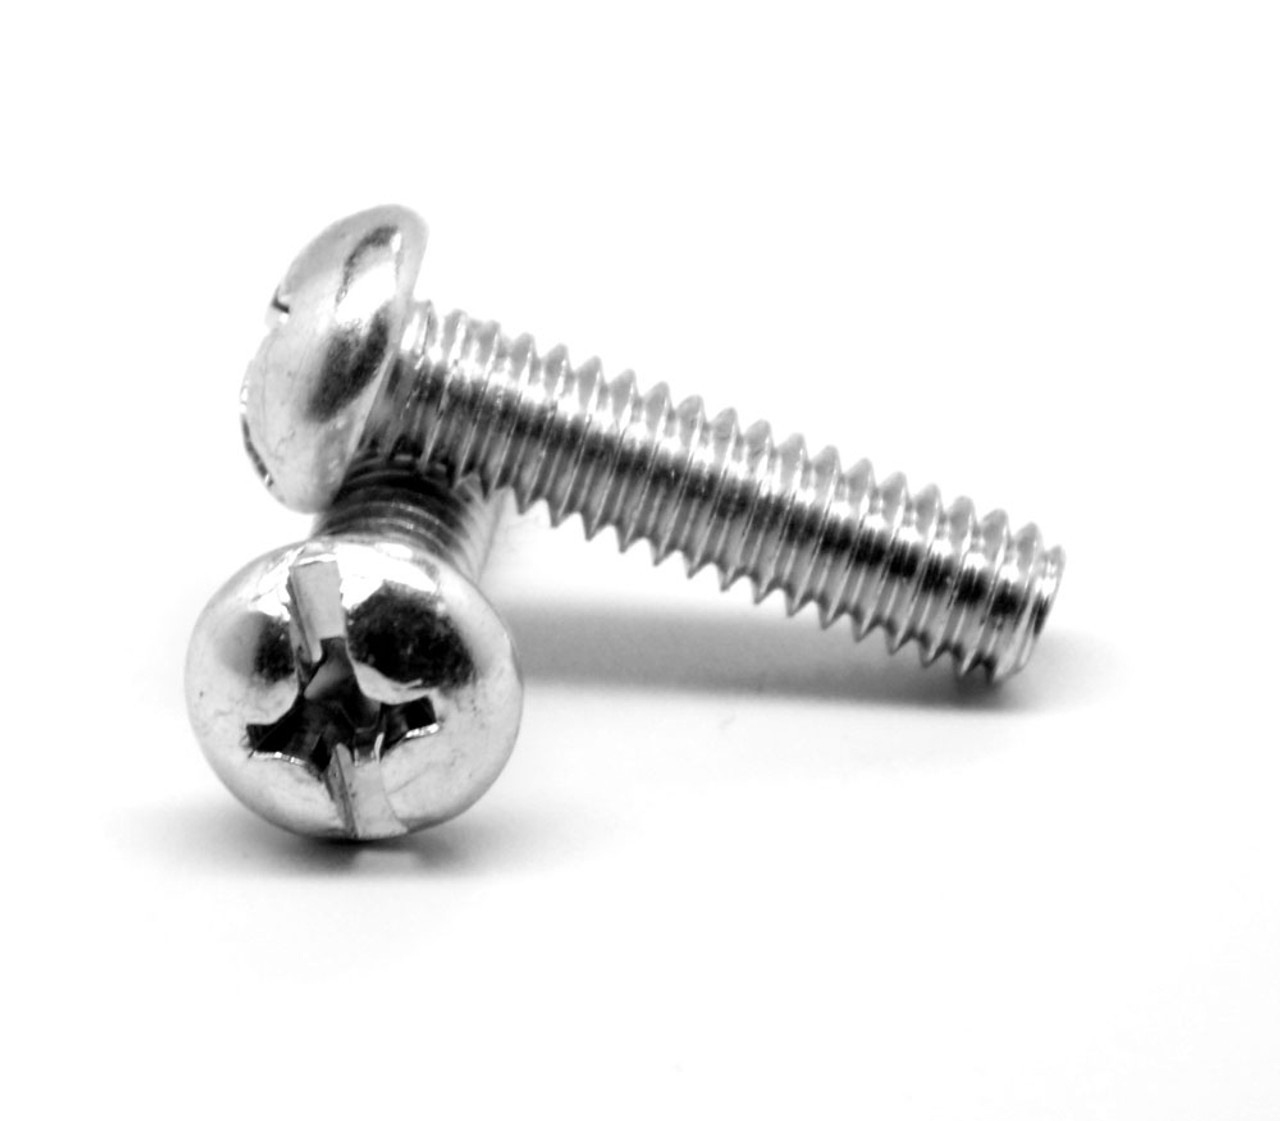 #6-32 x 1 1/4" (FT) Coarse Thread Machine Screw Combo (Phillips/Slotted) Round Head Low Carbon Steel Zinc Plated